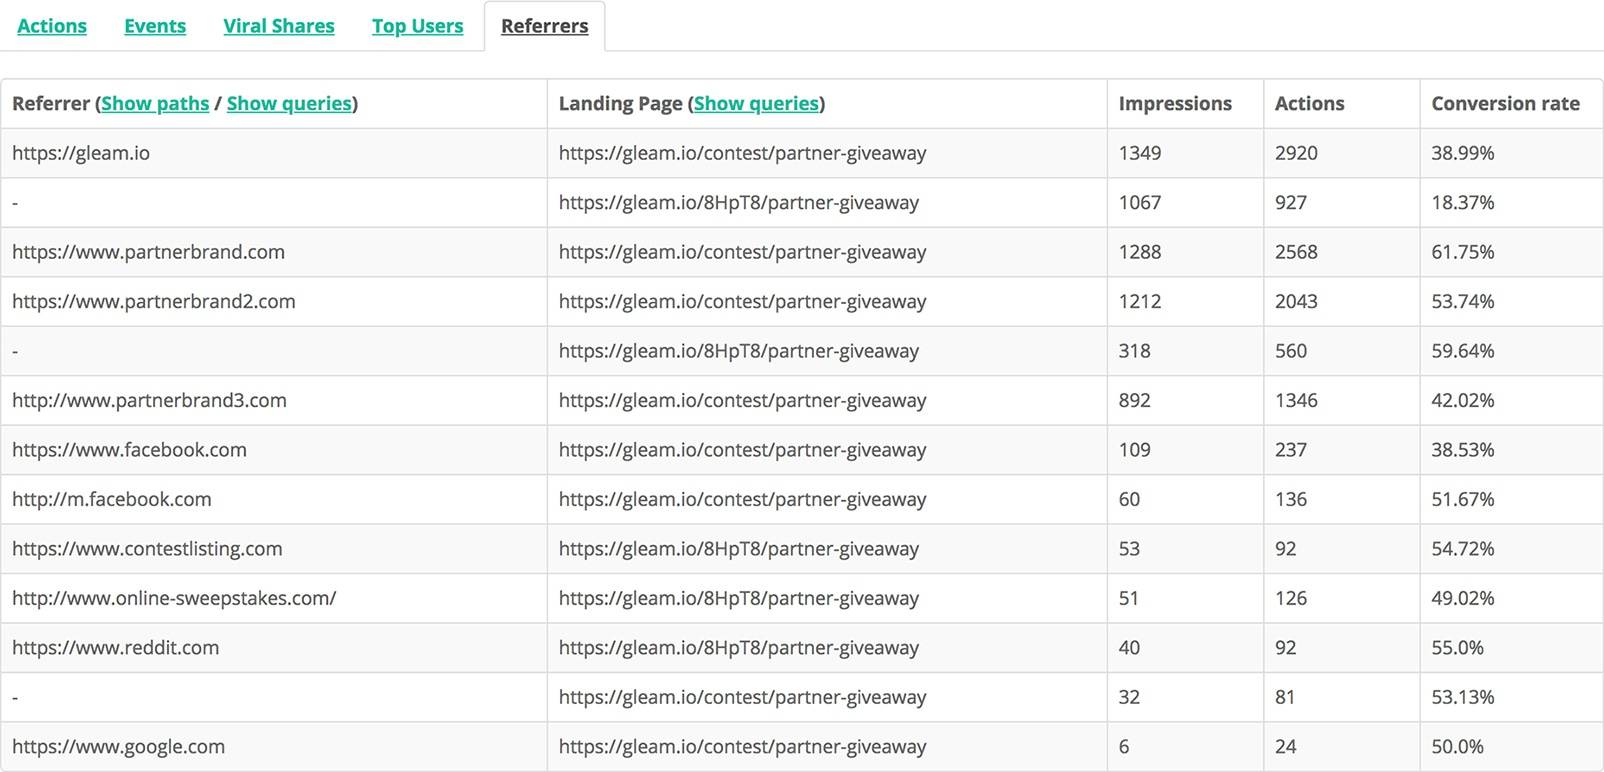 Top referrers reporting for a Gleam campaign